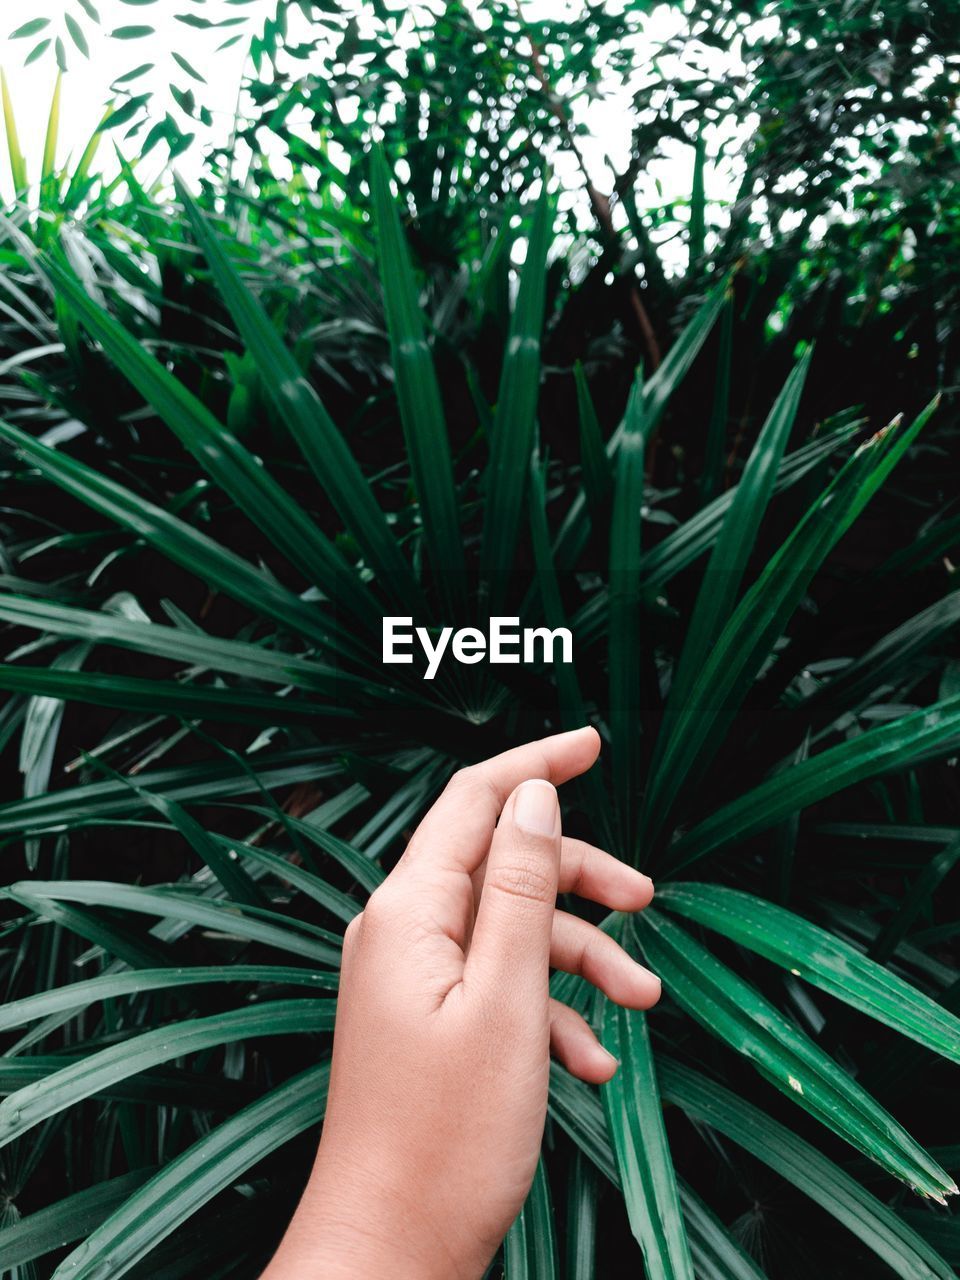 Cropped hand of person touching plants growing in park